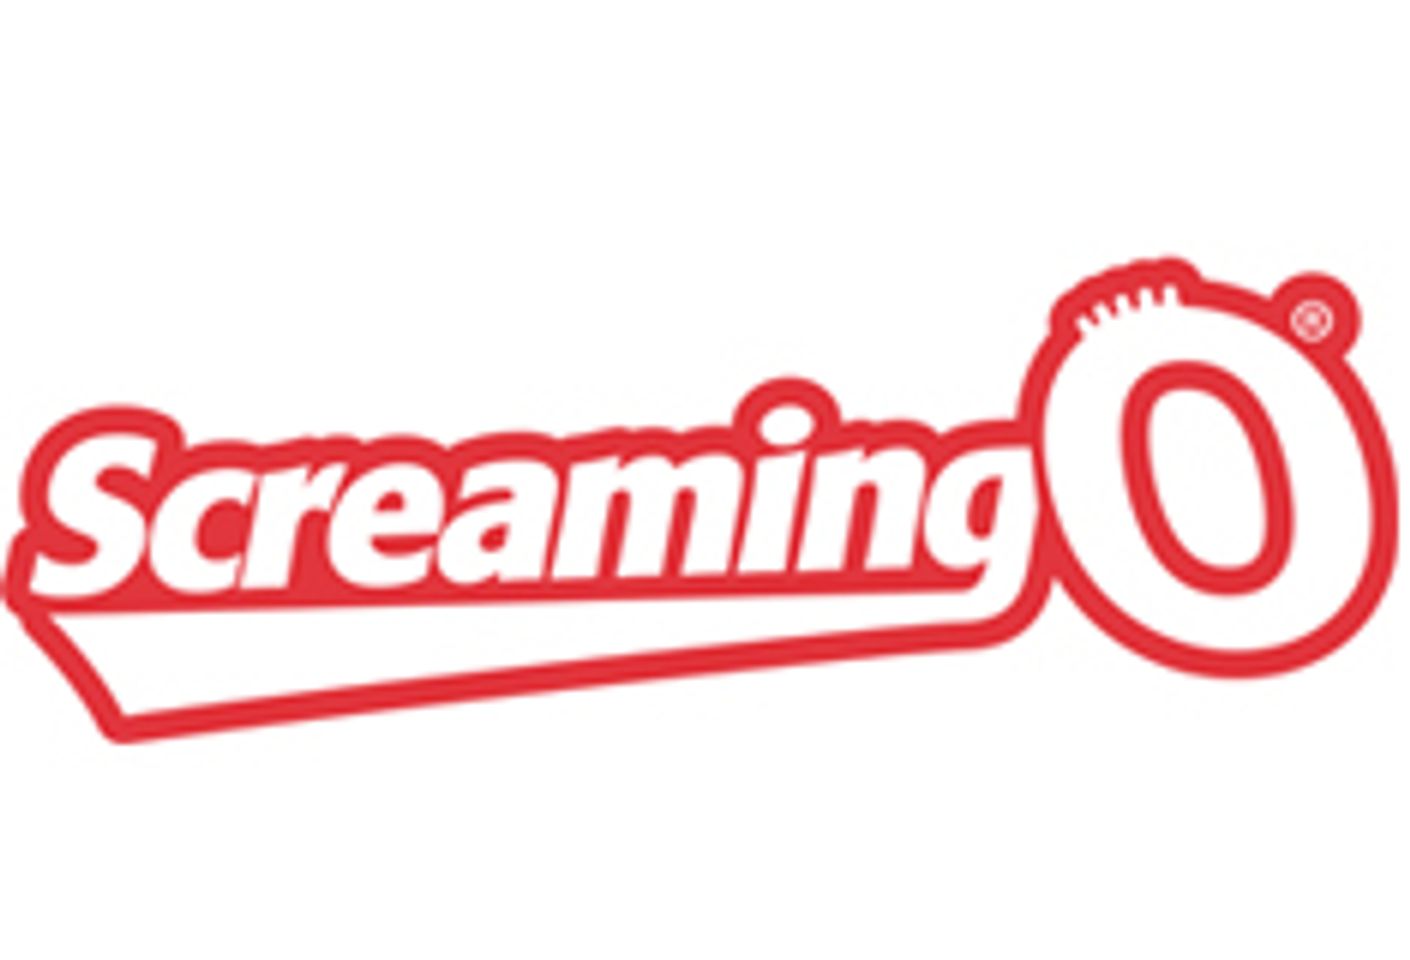 The Screaming O Joins Ann Summers' I Scream Truck Road Trip Across Britain